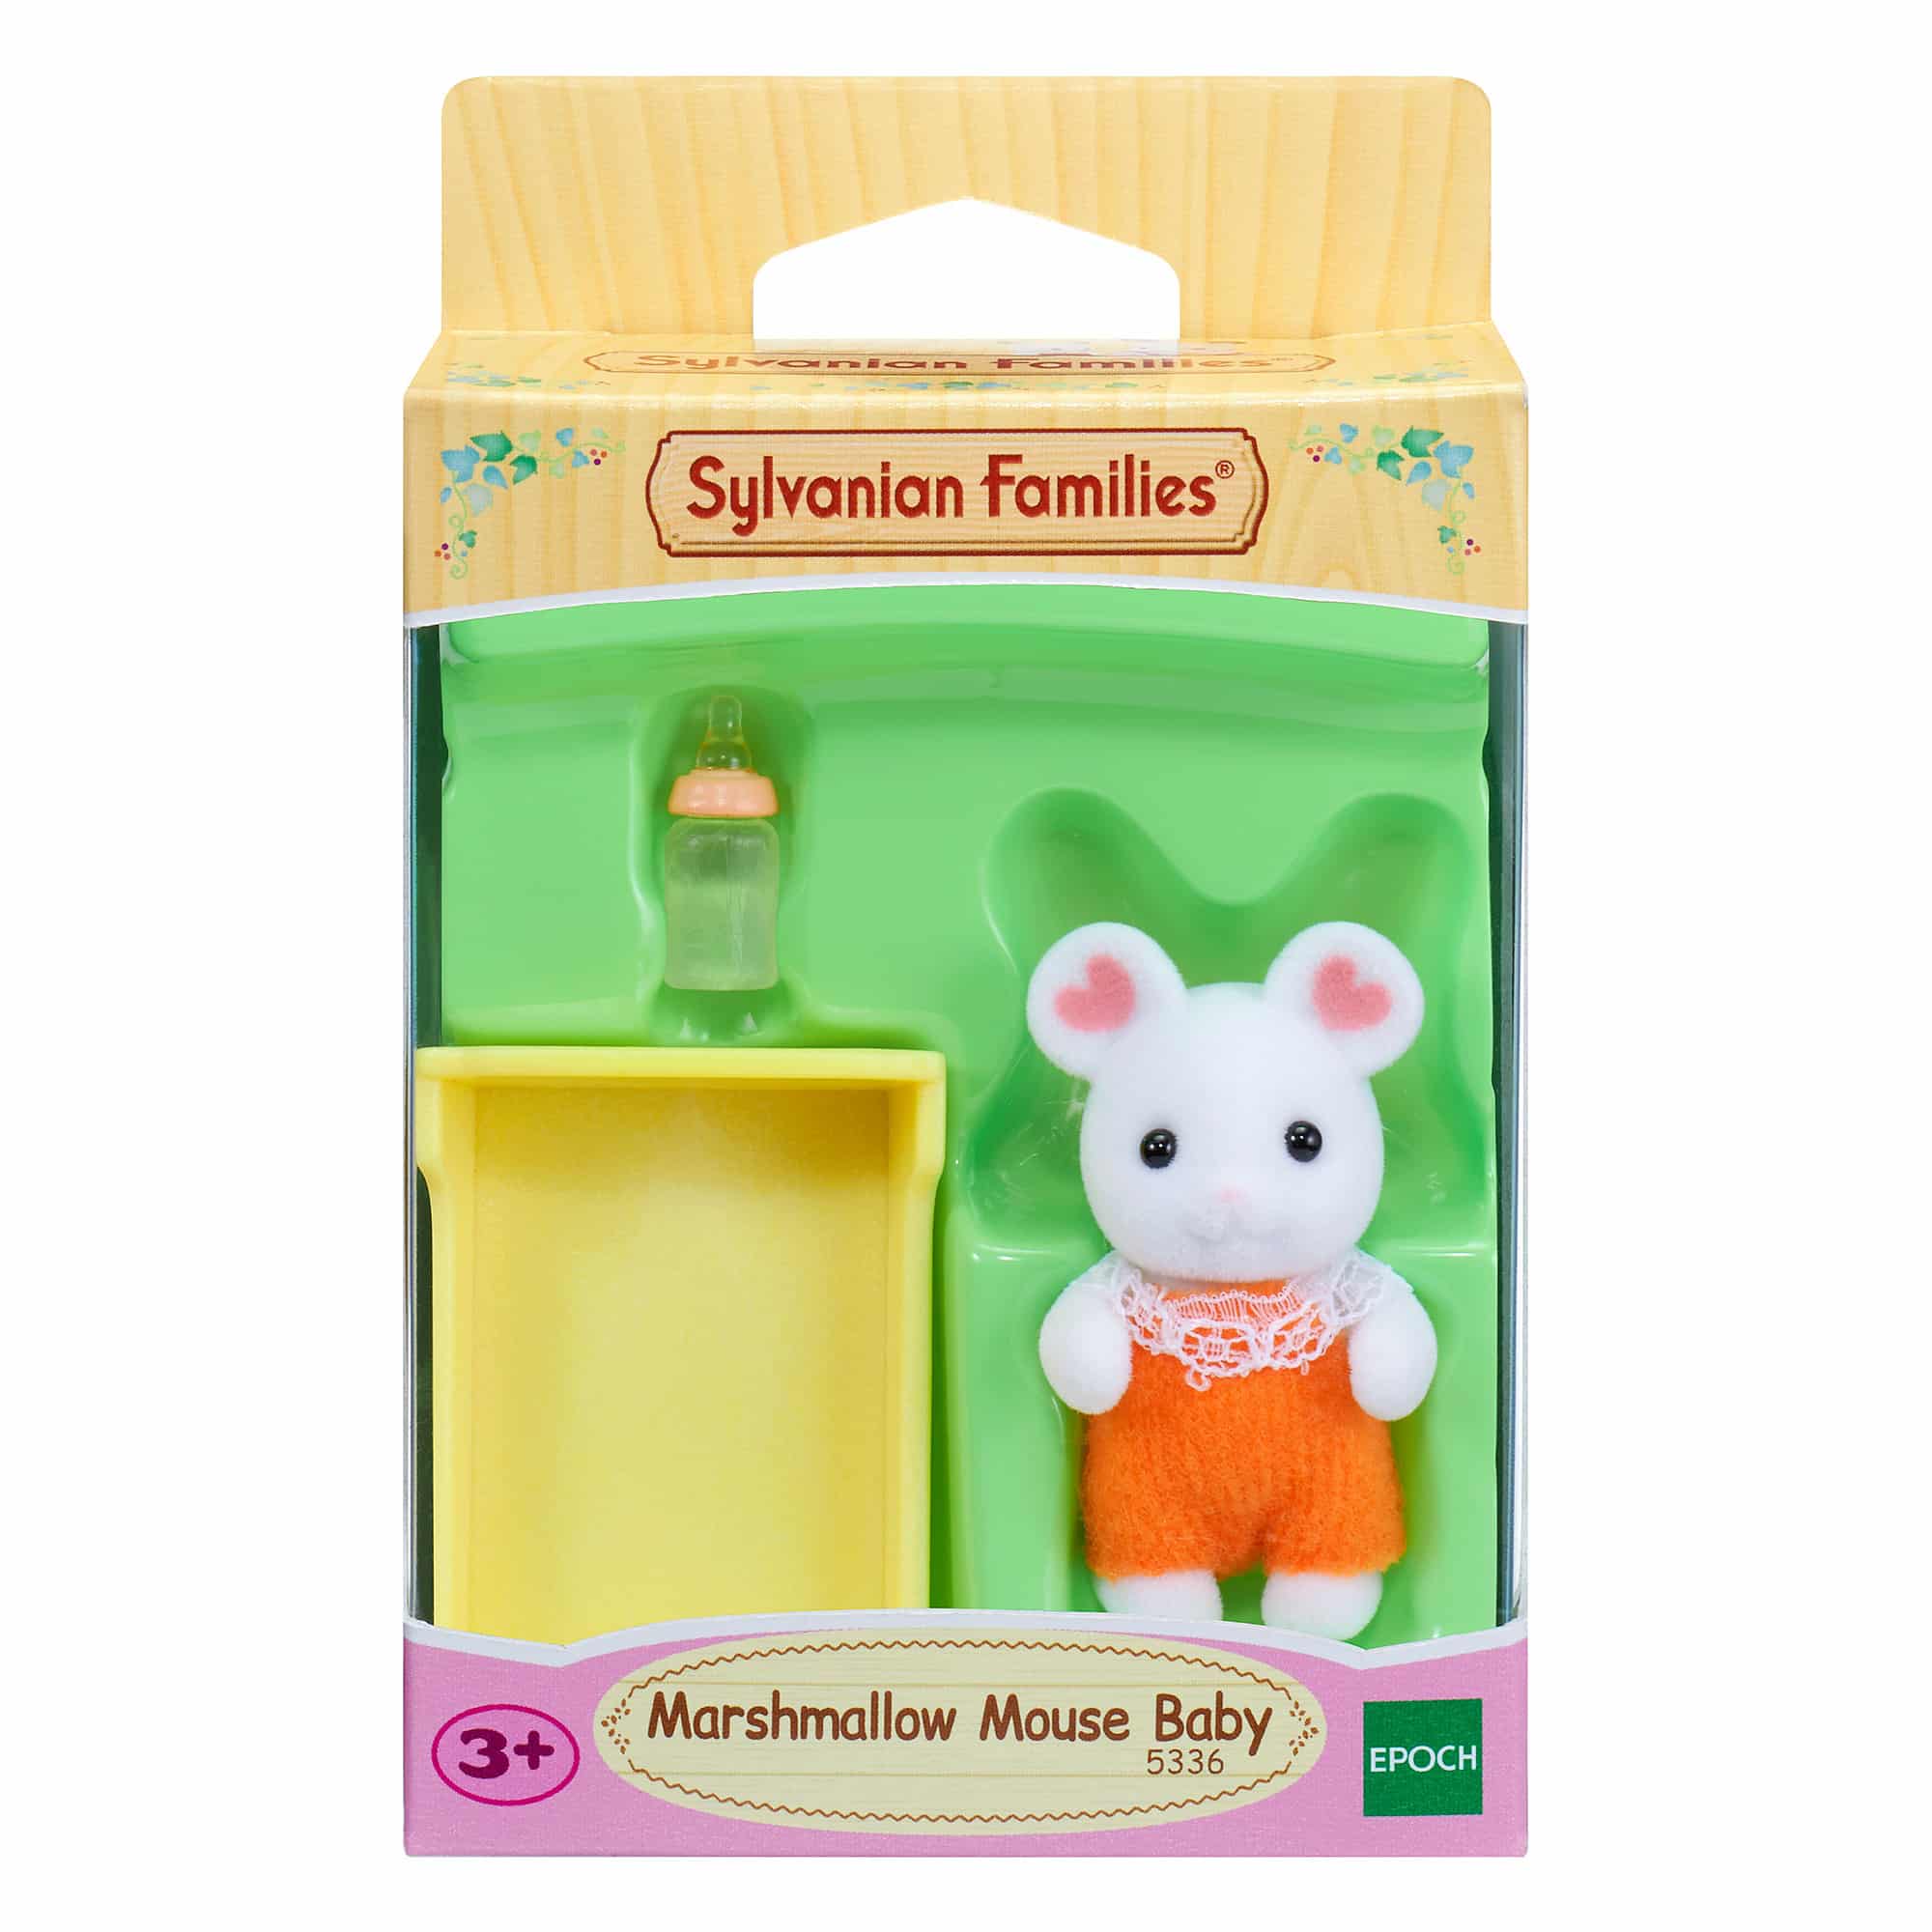 Sylvanian Families - Marshmallow Mouse Baby SF5336